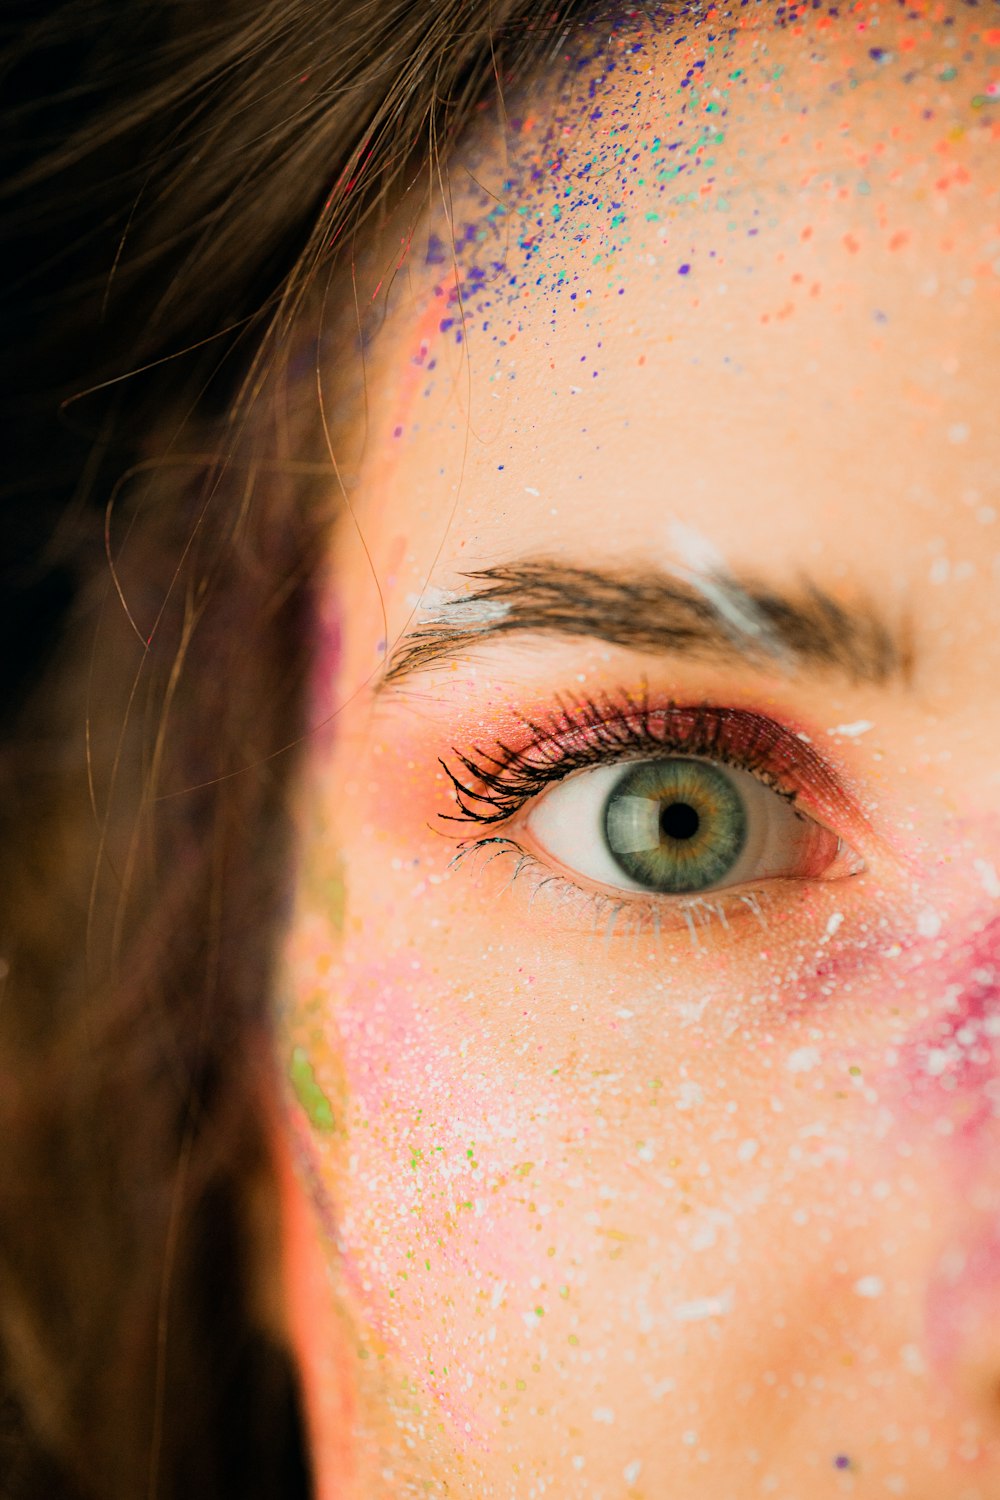 a close up of a woman's face with colored powder all over her face